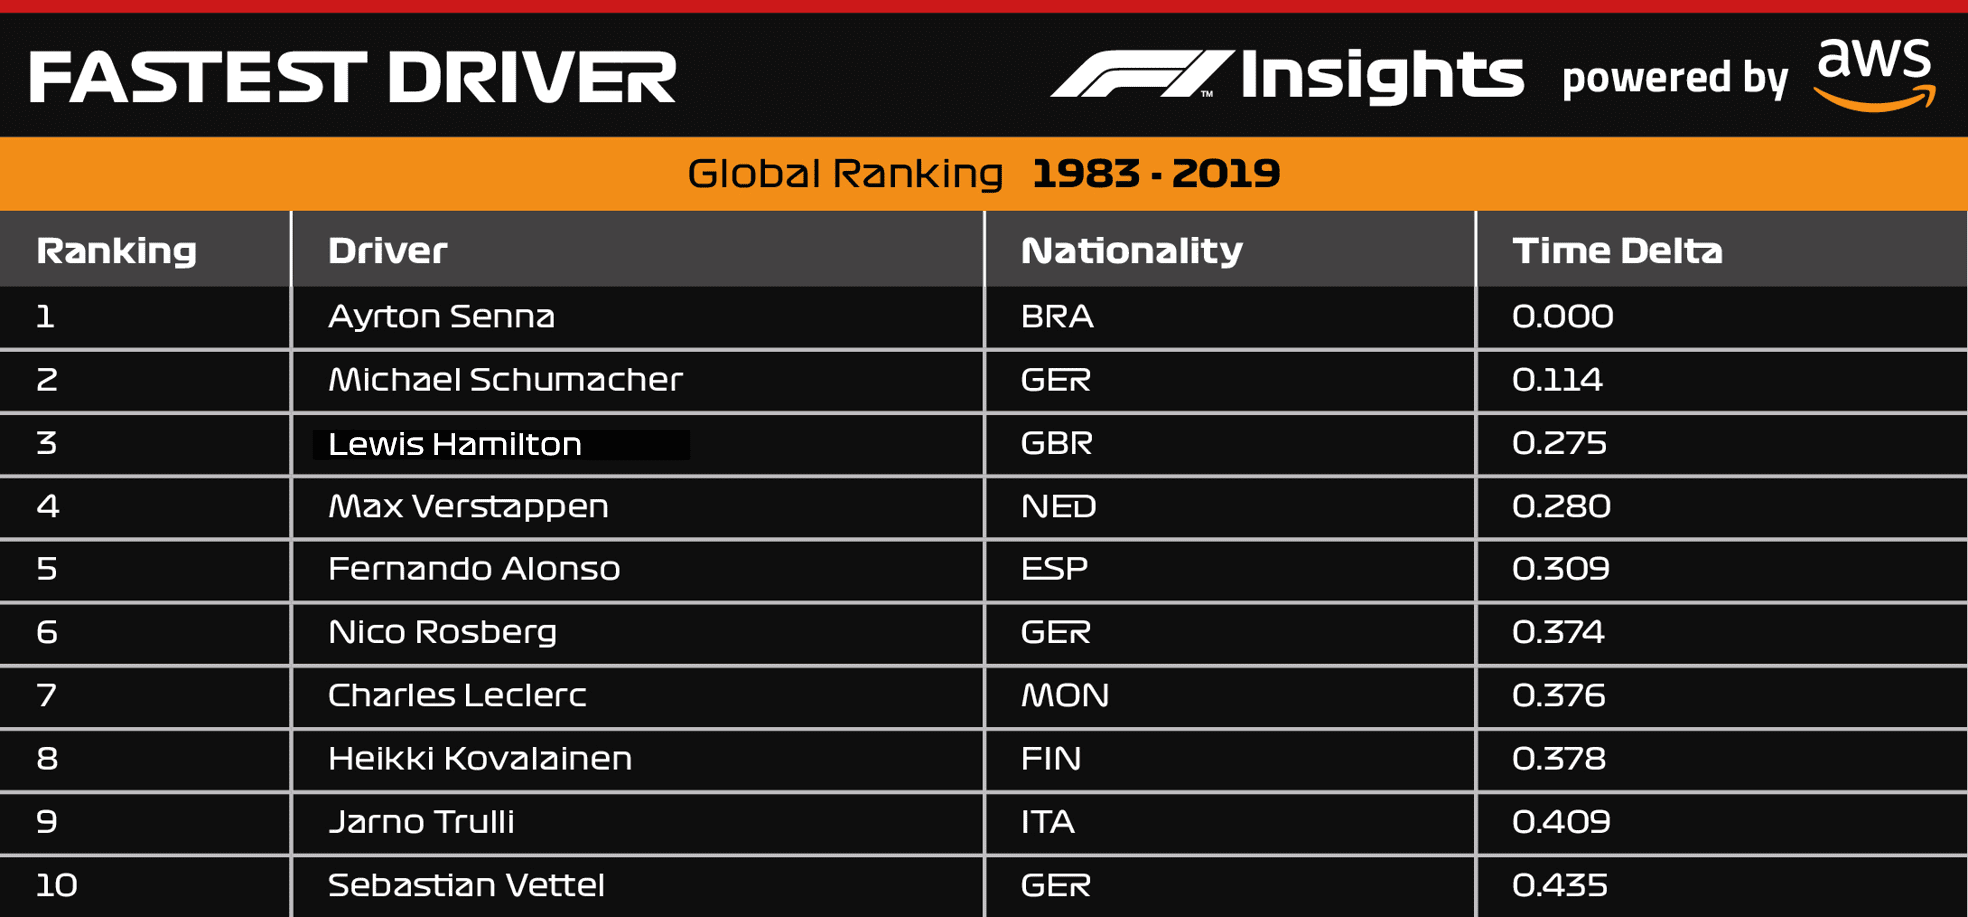 Fastest Driver Top 10